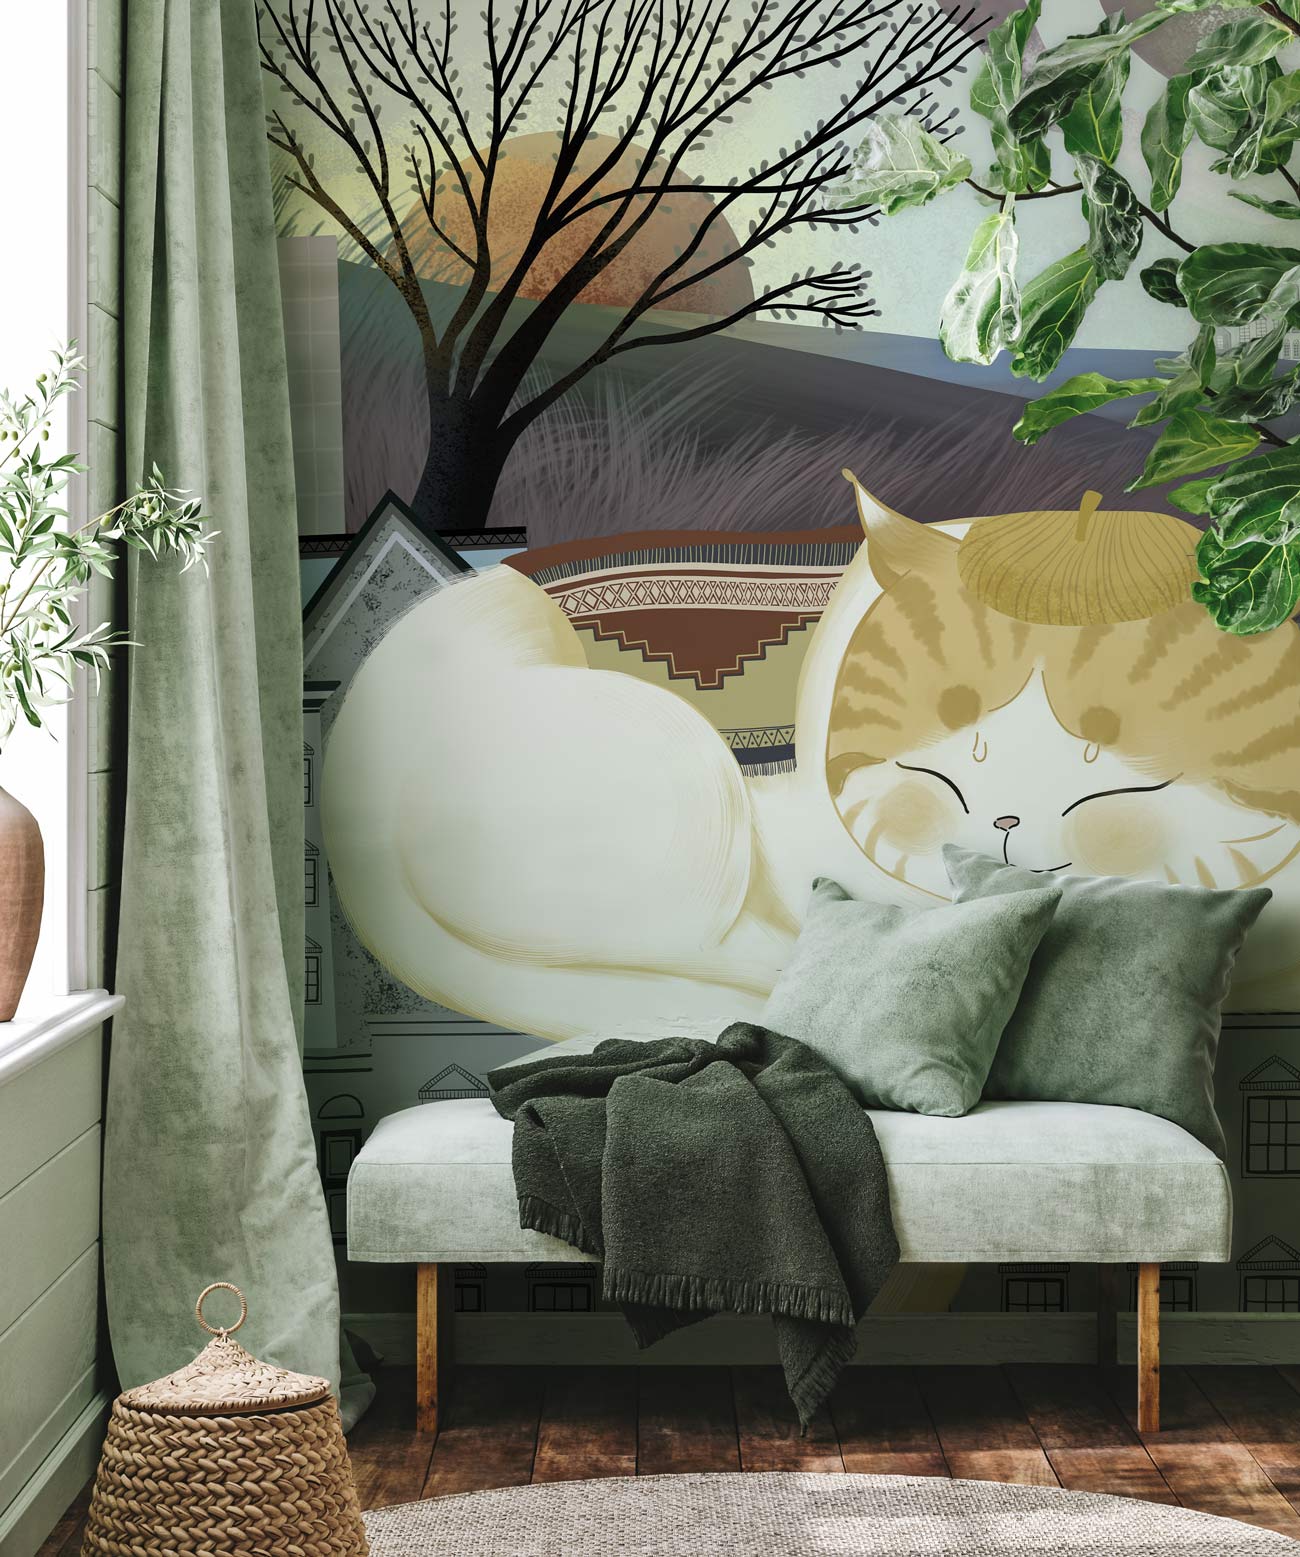 Large Wallpaper Mural of a Snuggling Cat for the Hallway Decor Featuring an Animal